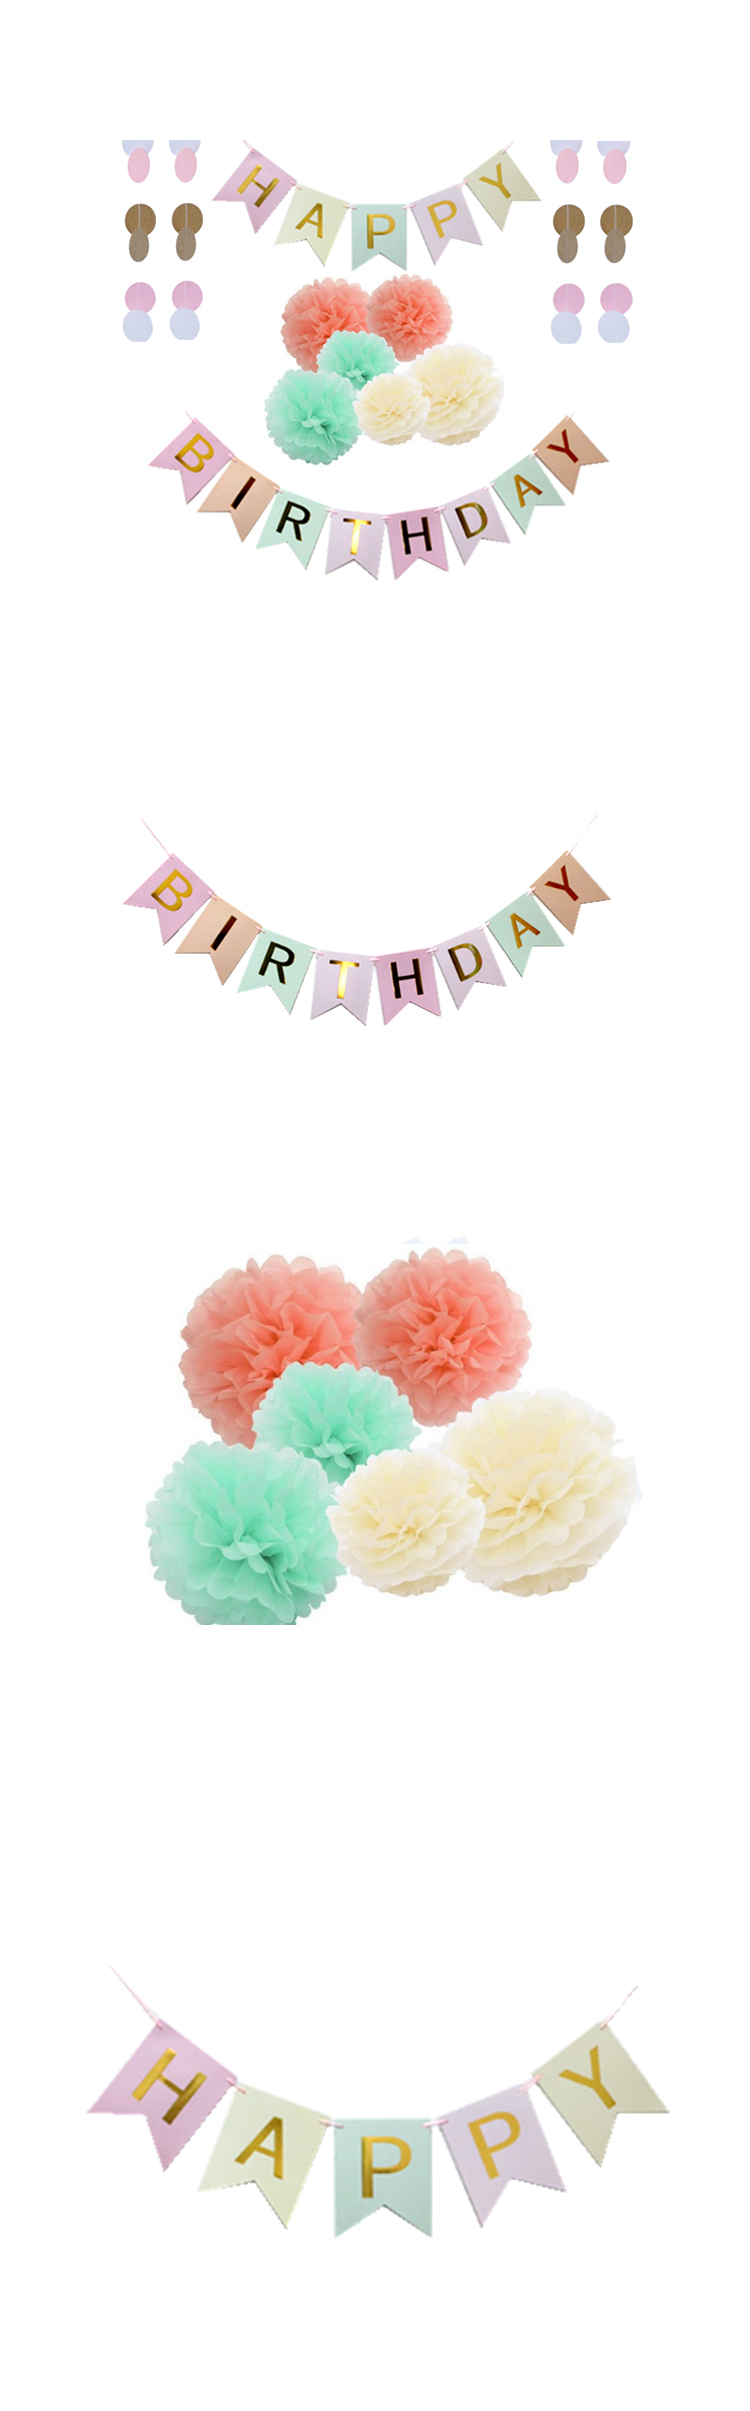 PAFU latex balloon circle garland and happy birthday banner set party decorations paper birthday party supplies